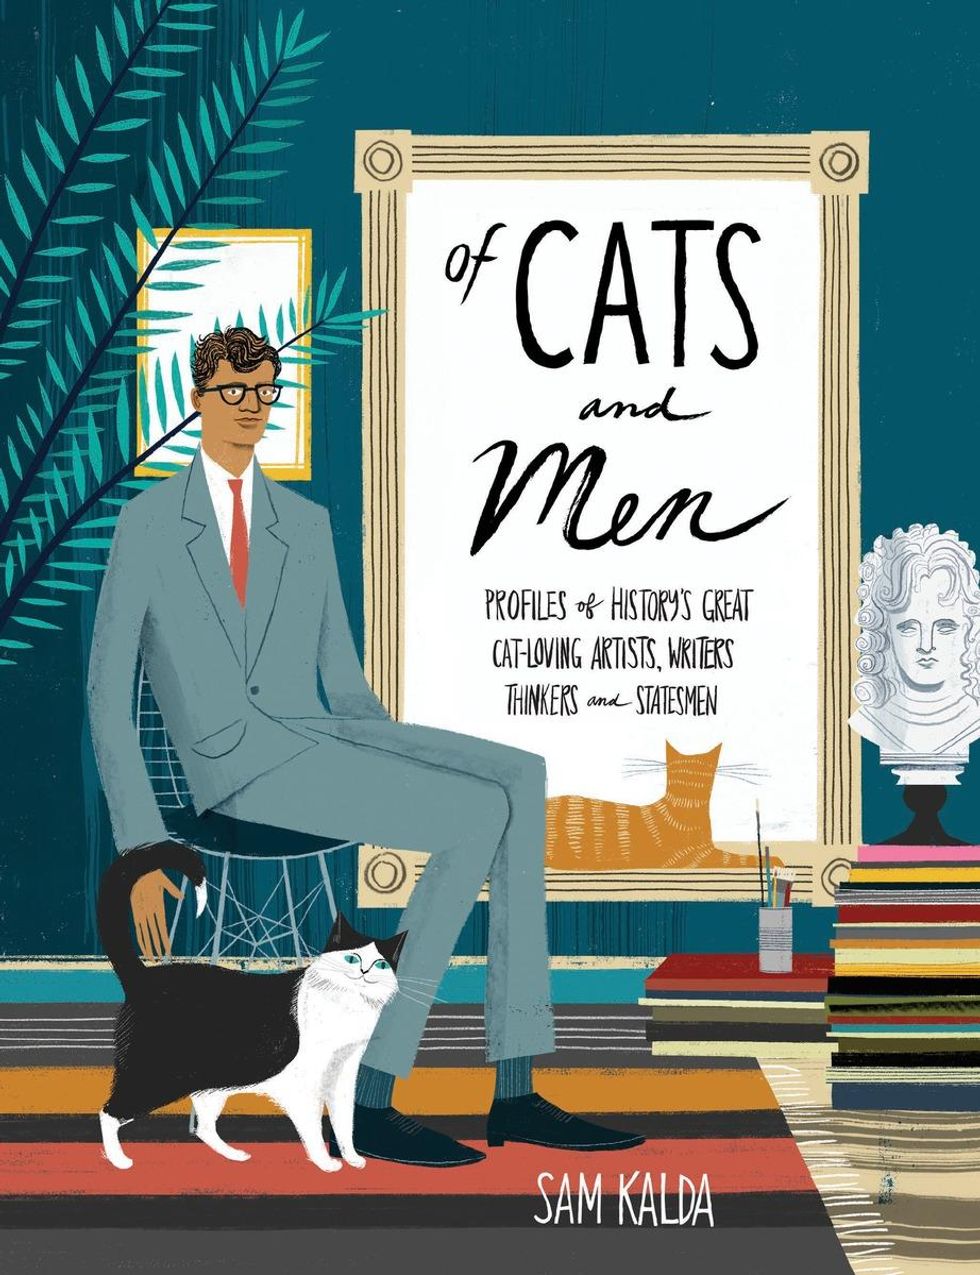 'Of Cats and Men:' In Conversation with Illustrator Sam Kalda